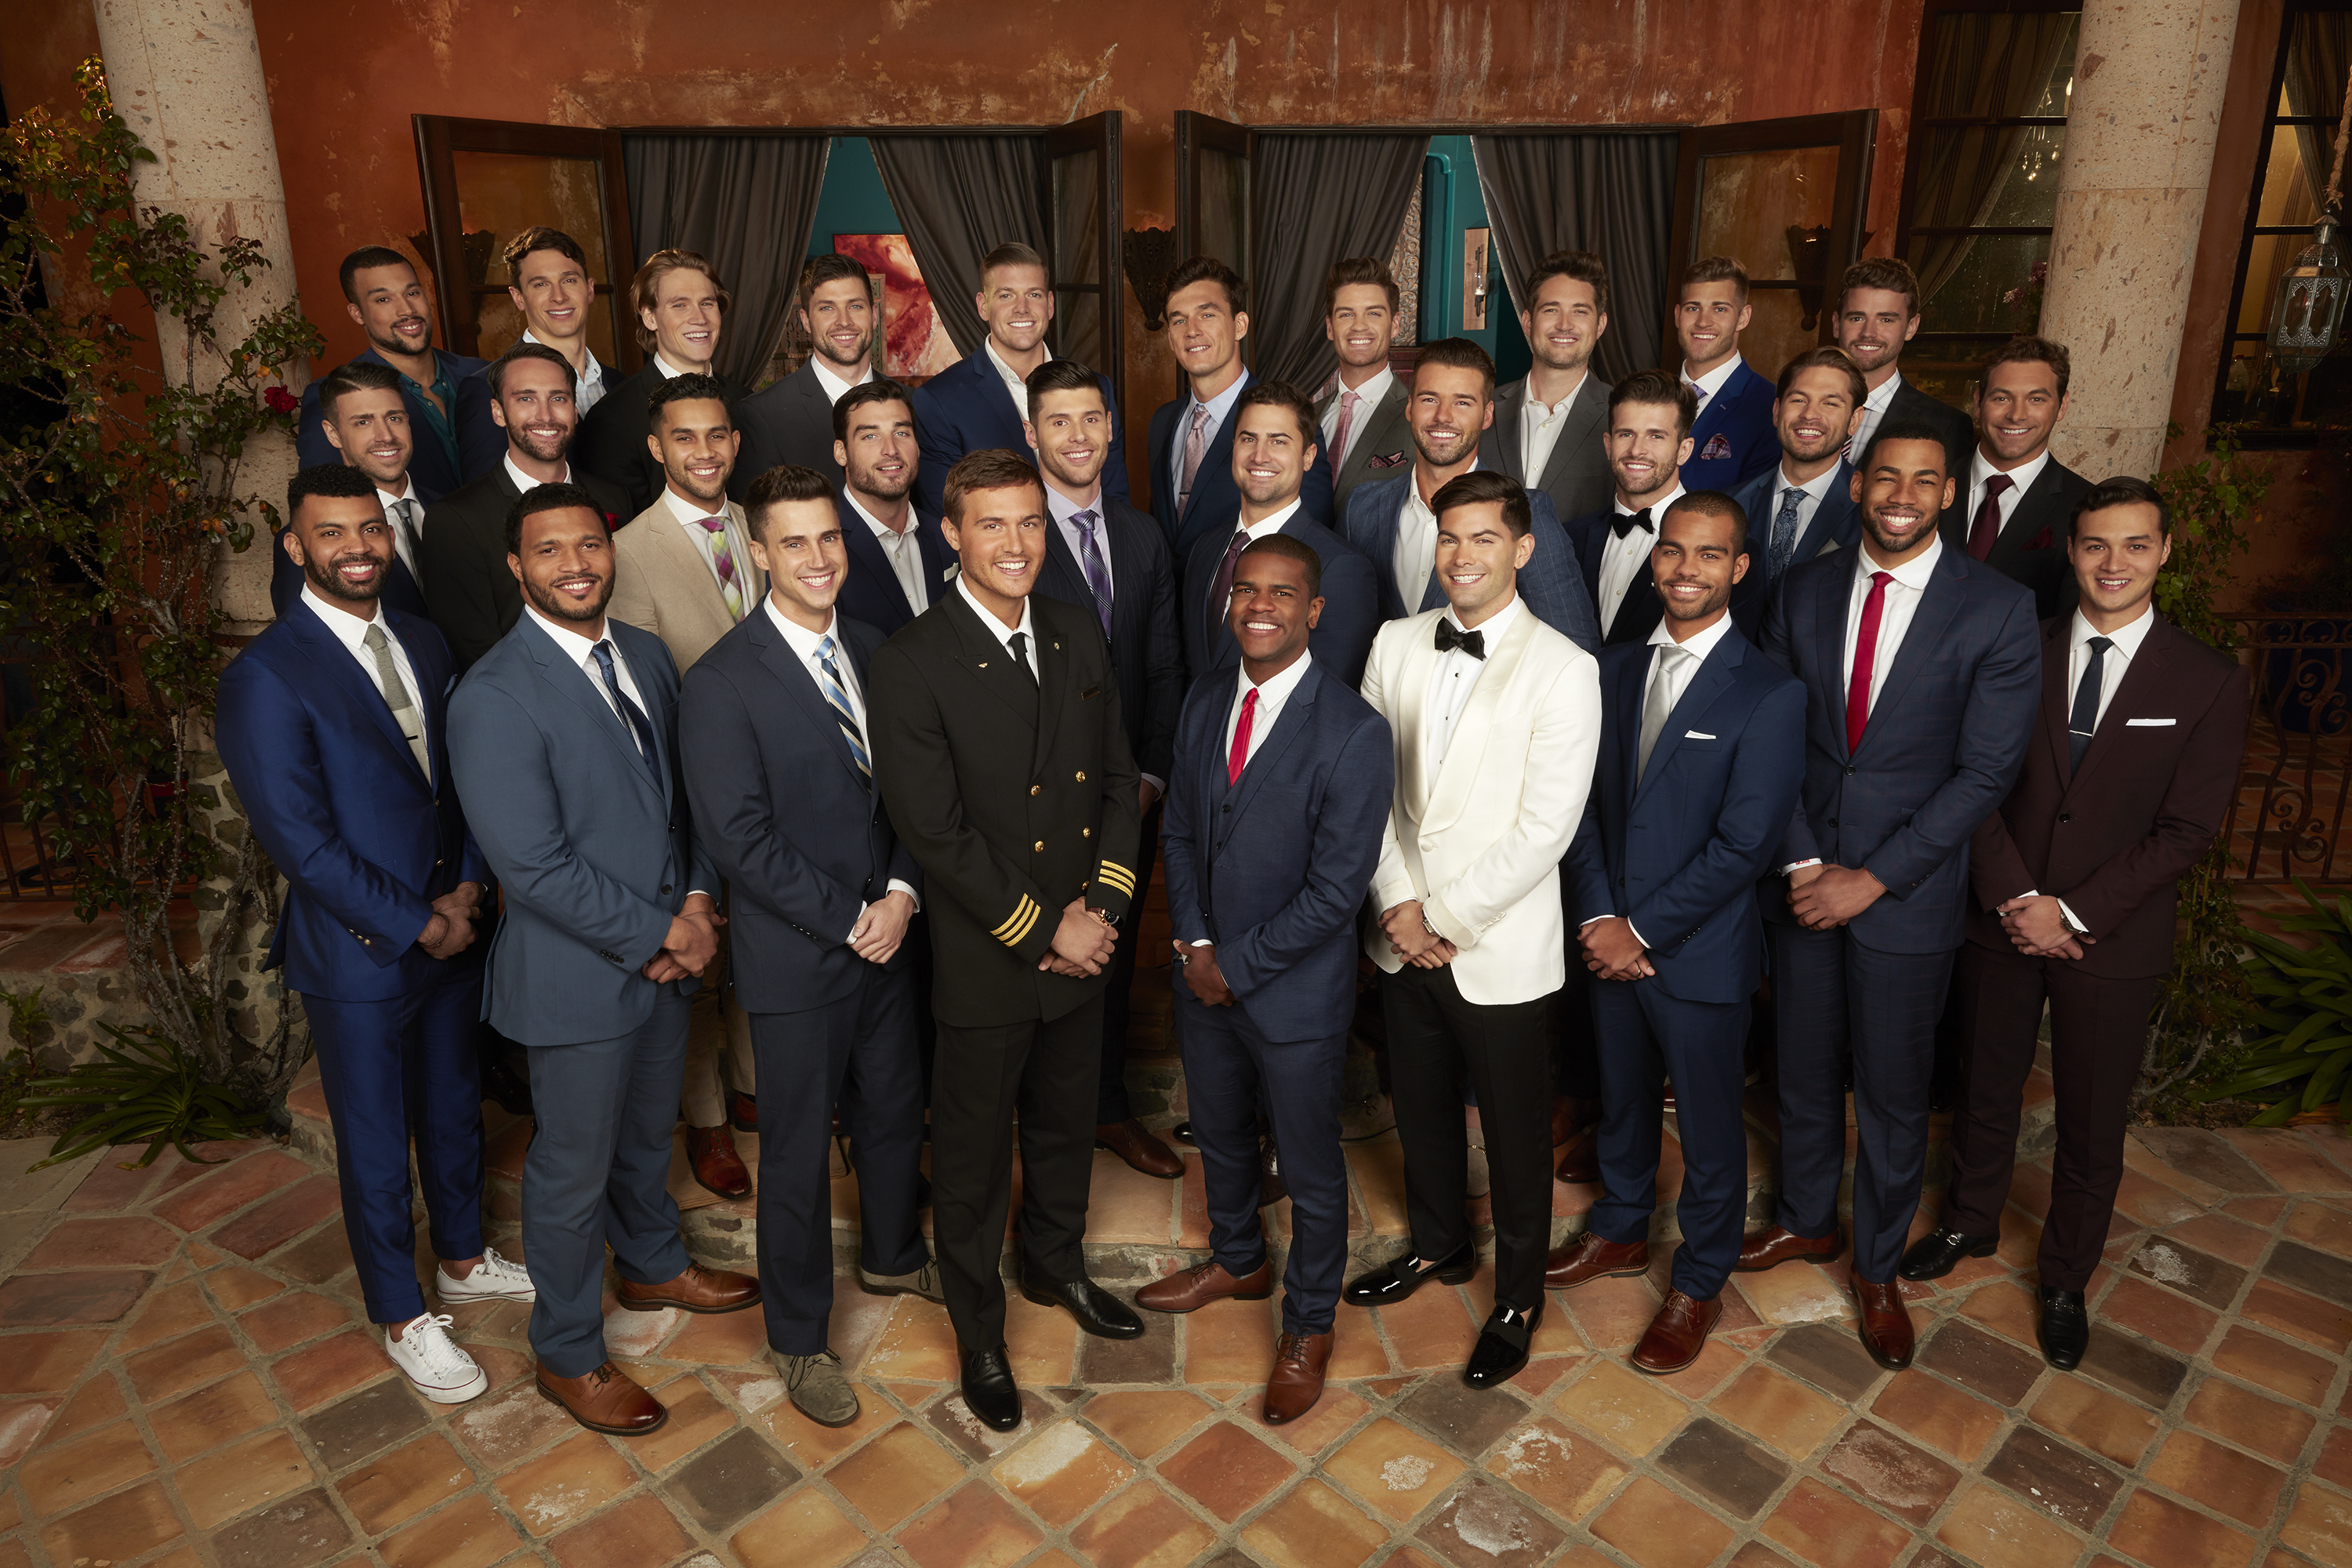 The Bachelorette Spoilers 2019 Contestants And Winners On Premiere